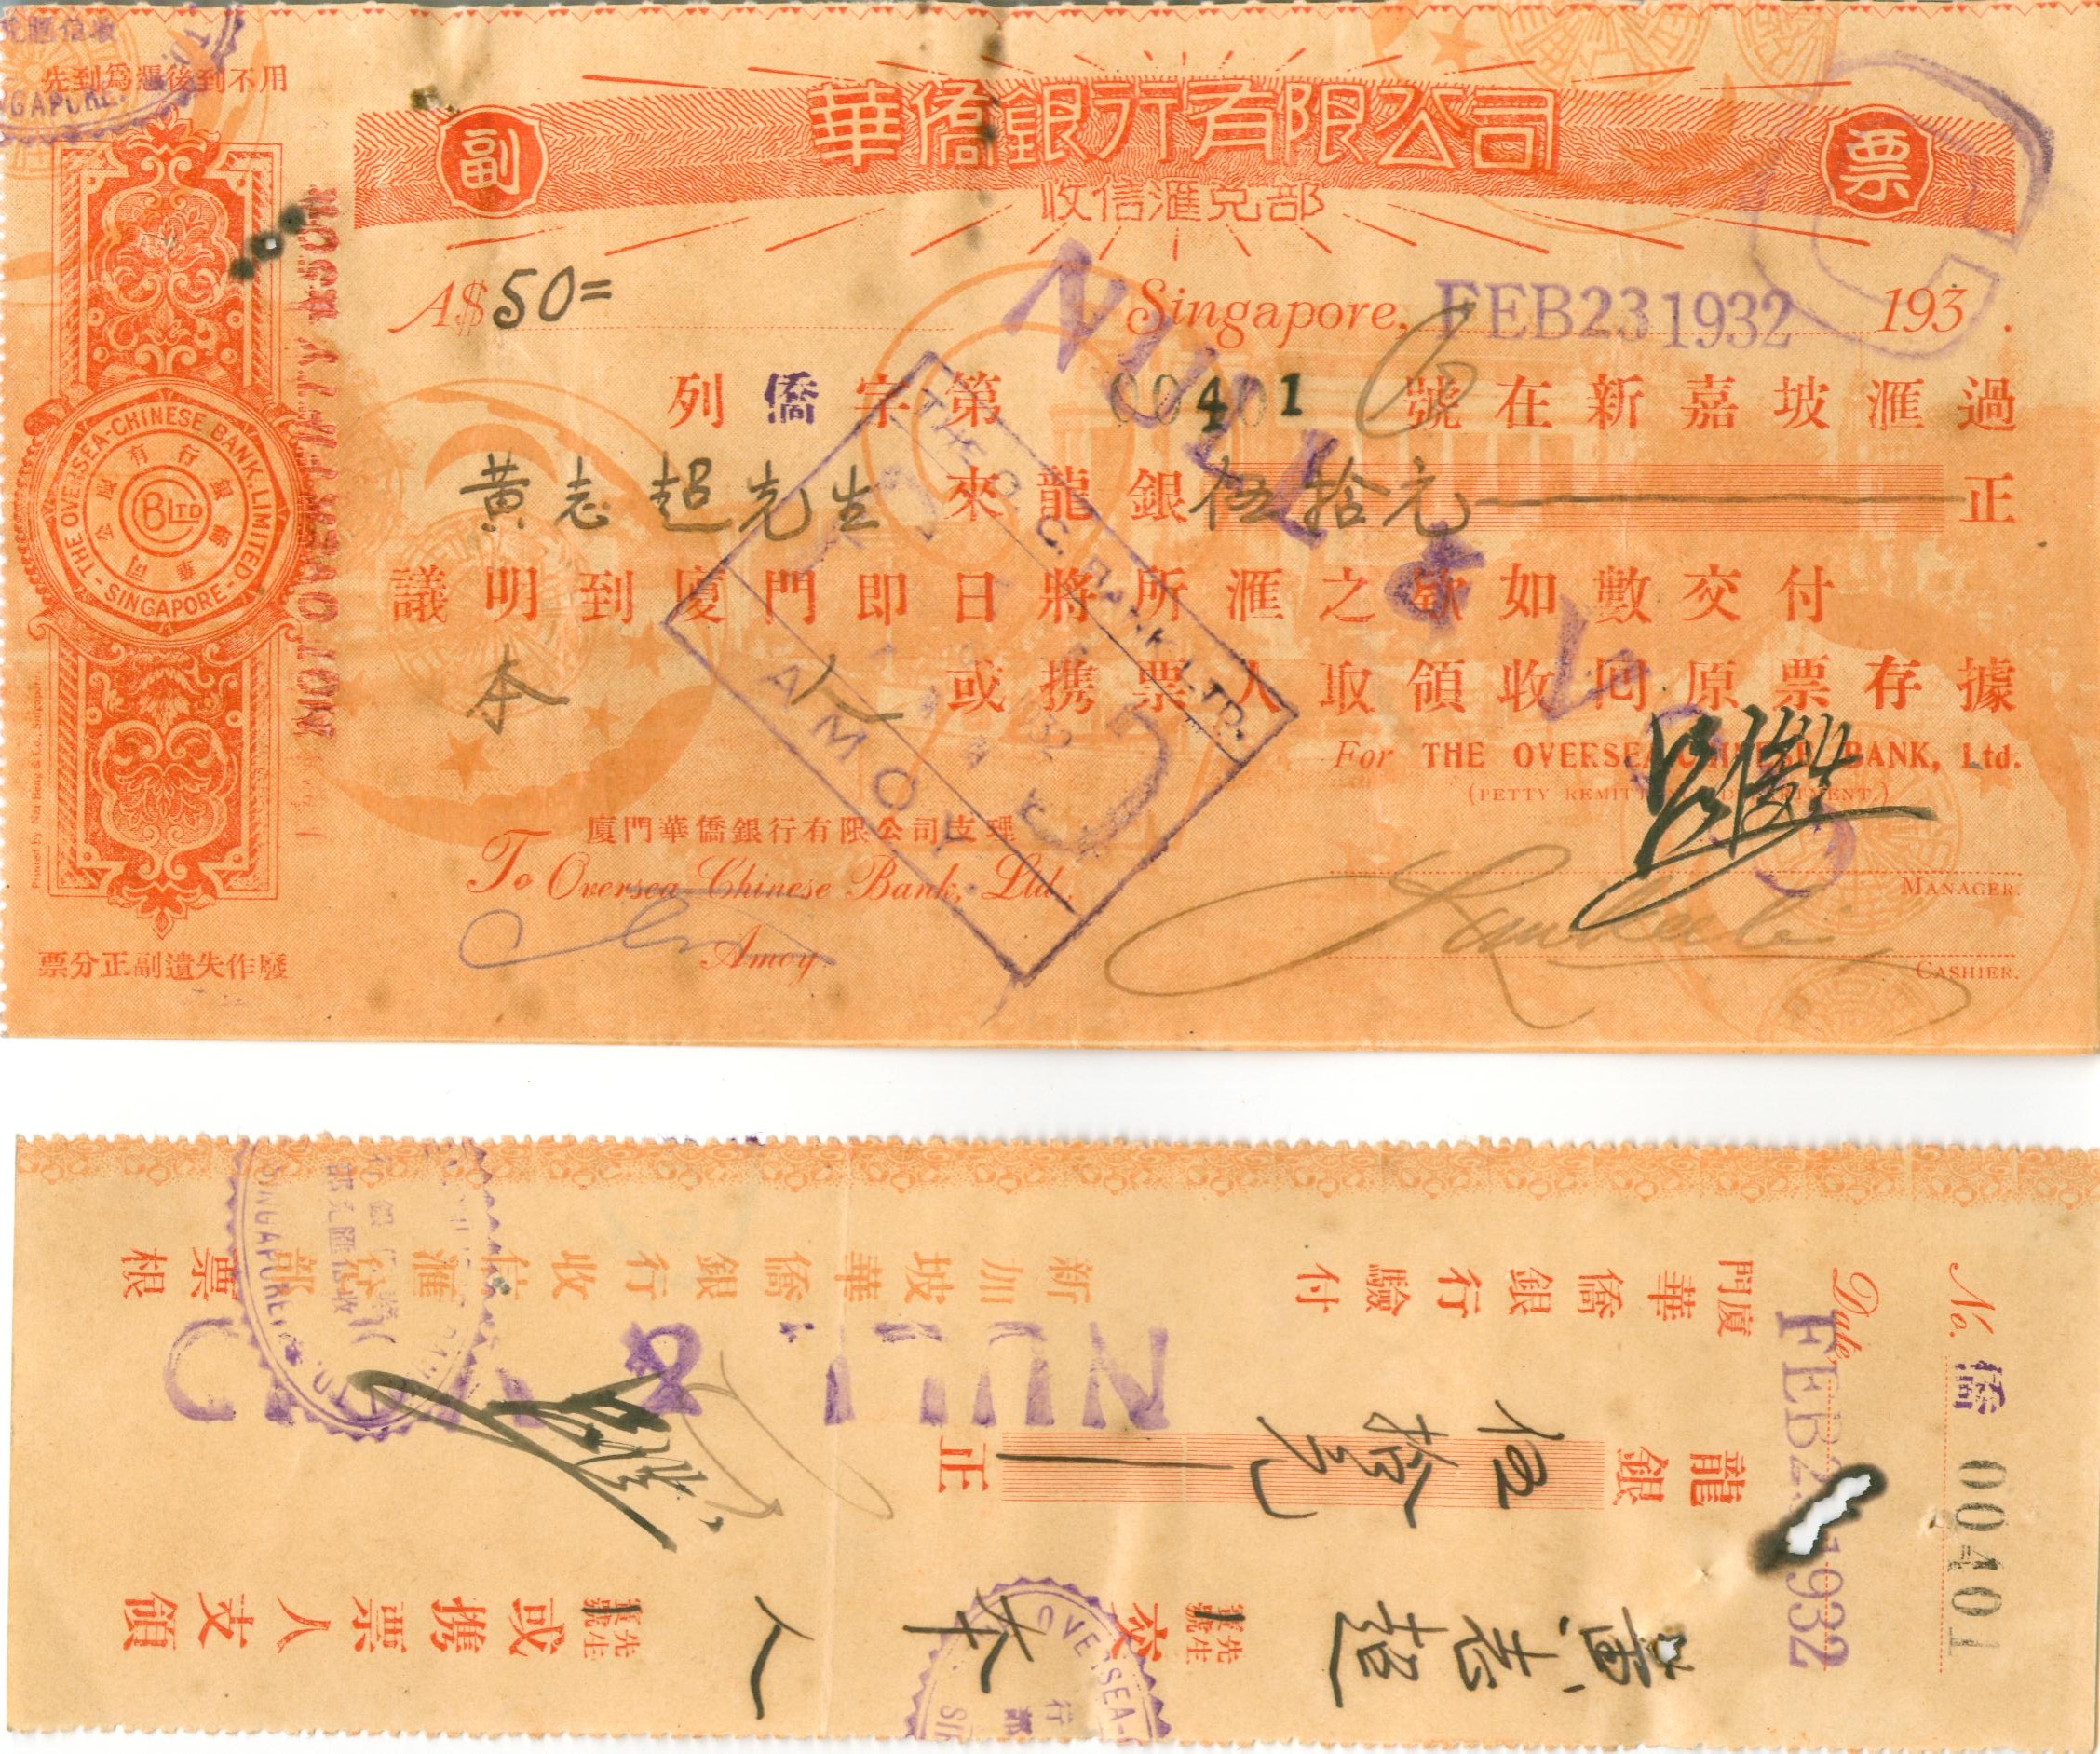 D2763, Check of Oversea-Chinese Bank Limited (Singapore to Amony), Cheque 1932